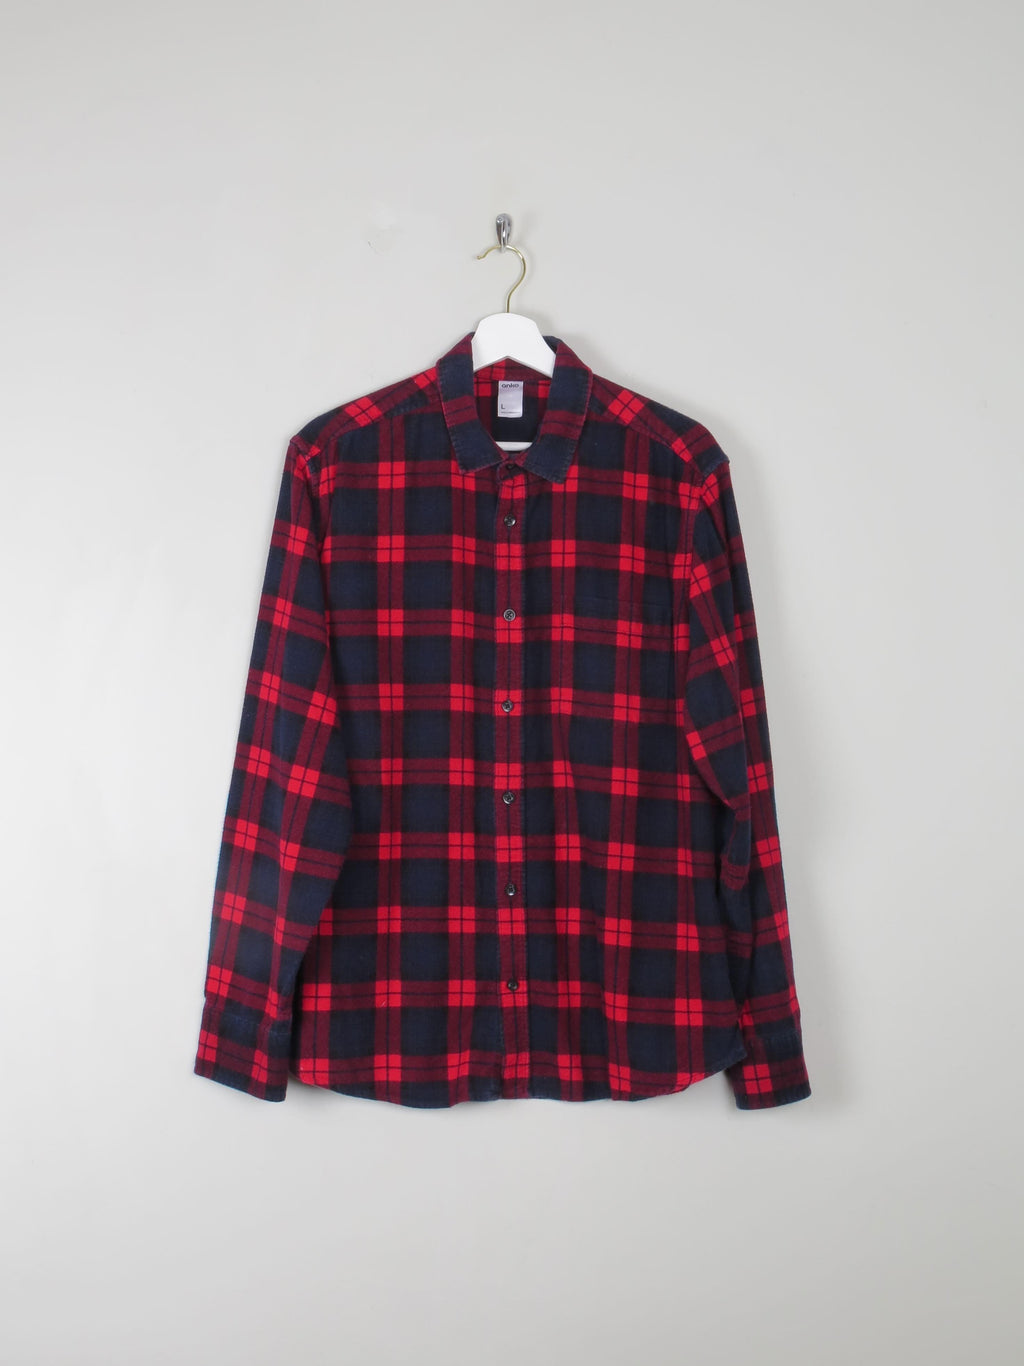 Men's Vintage Style Check Flannel Shirt M - The Harlequin